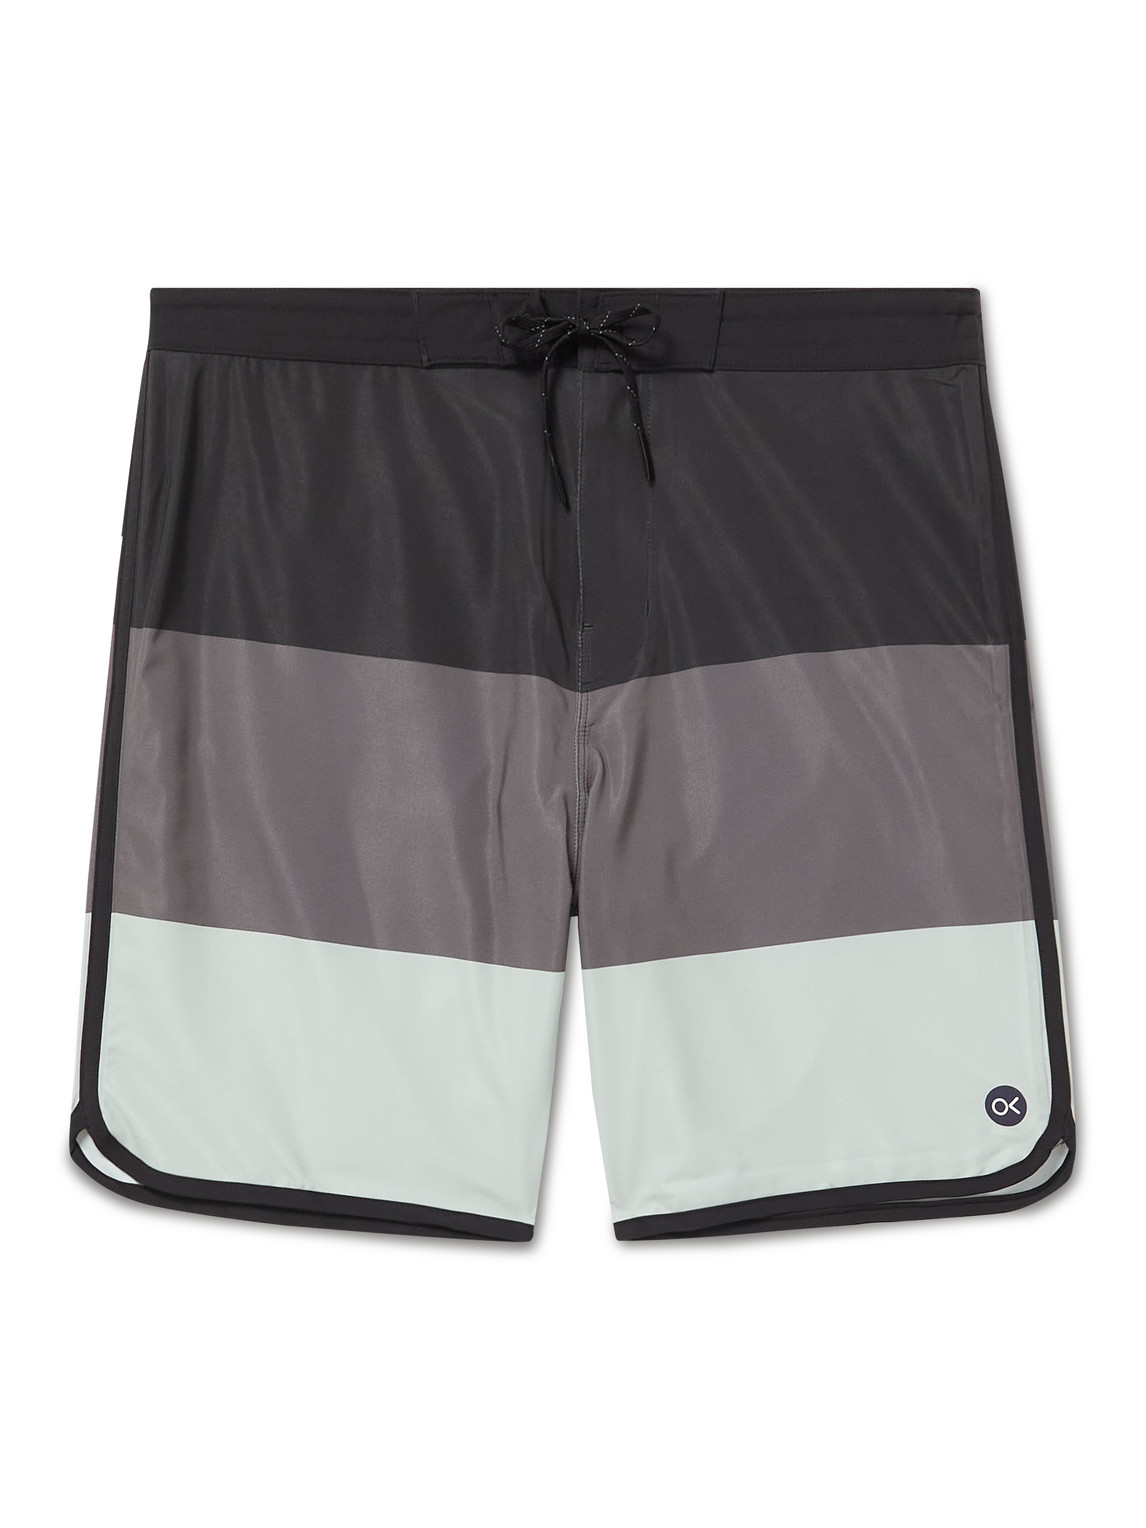 Tasty Scallop Mid-Length Printed Recycled-Shell Swim Shorts